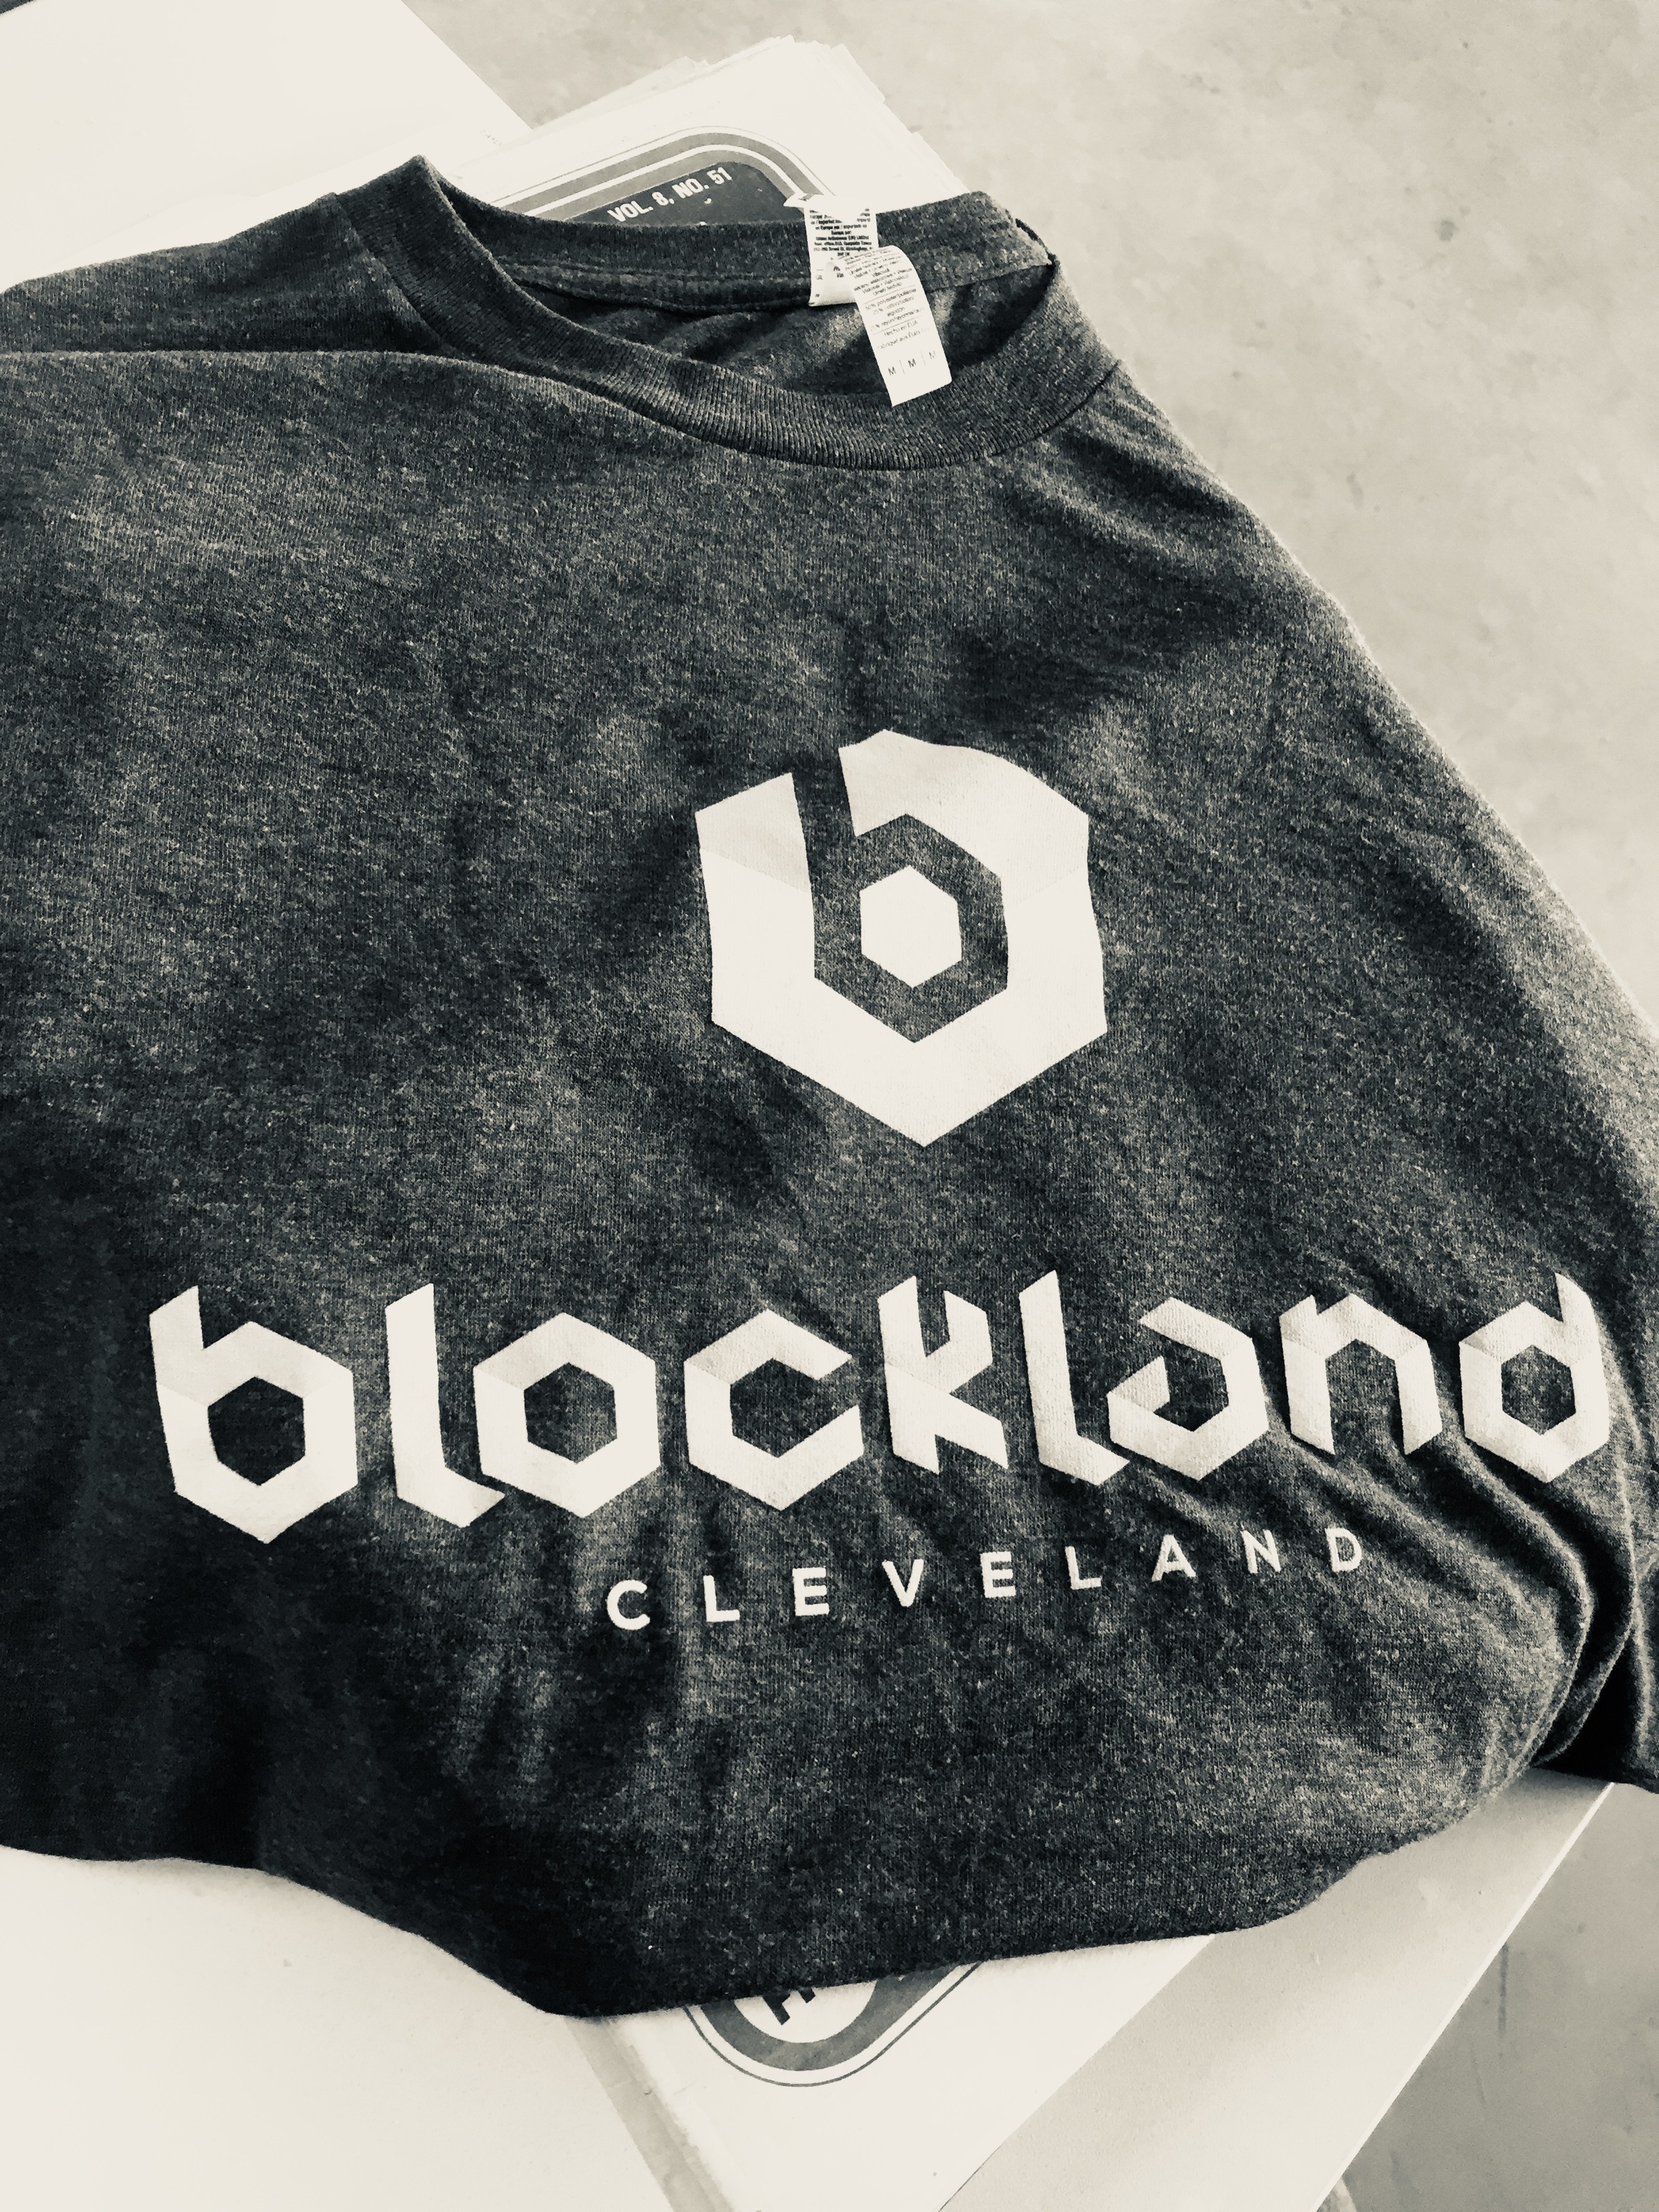 Blockland : Online Games Review Directory